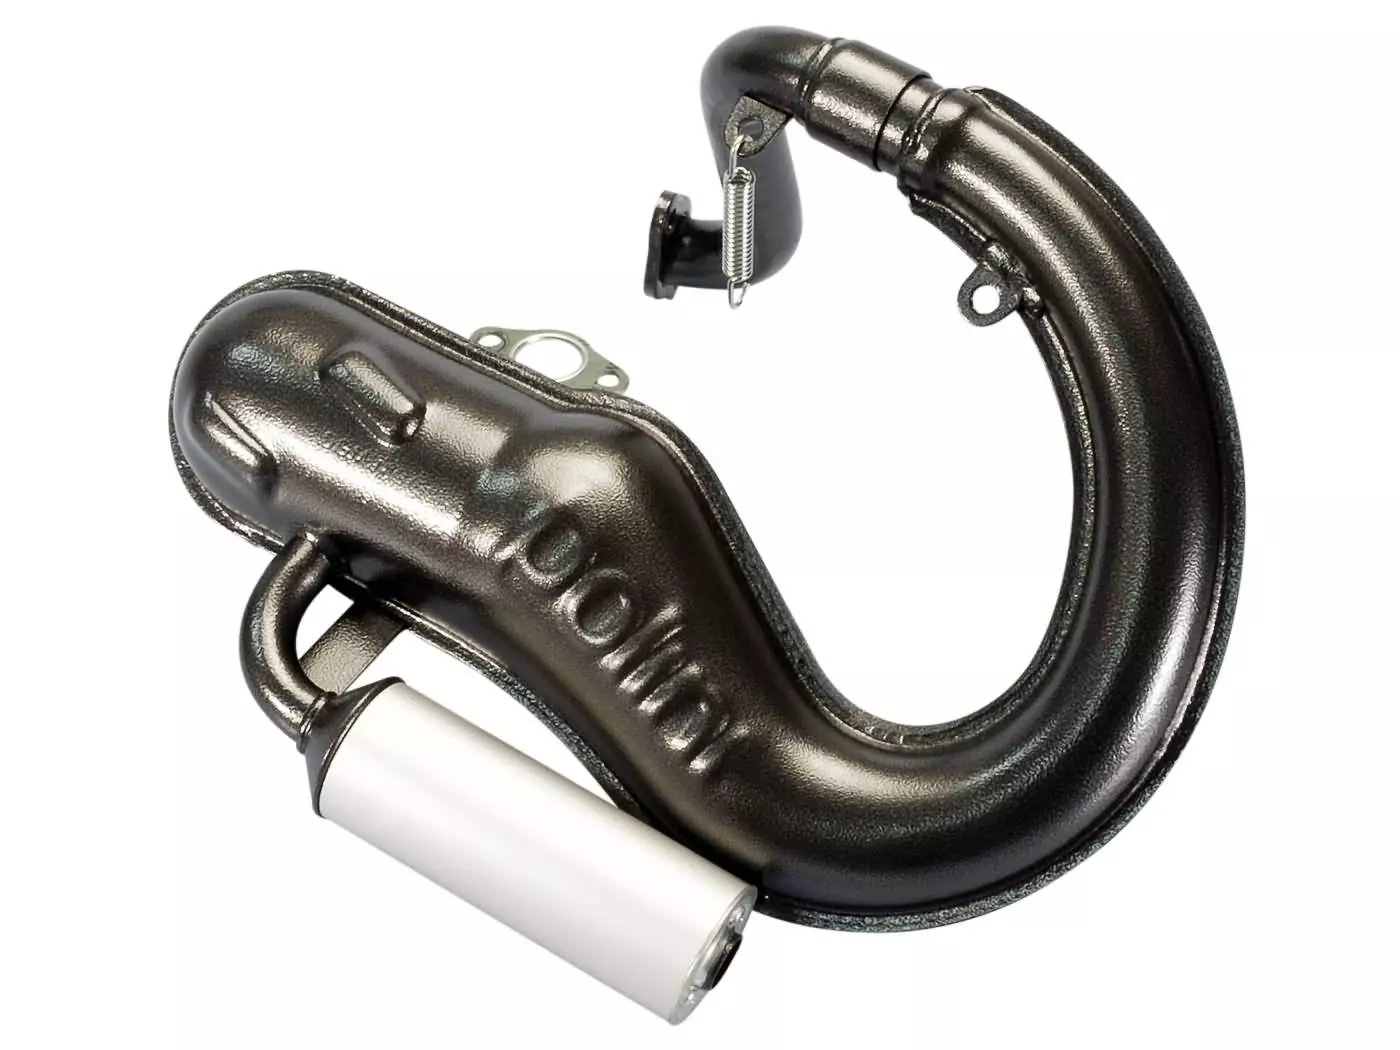 Exhaust Polini Sport W/ Aluminum Silencer For Vespa 50 Special